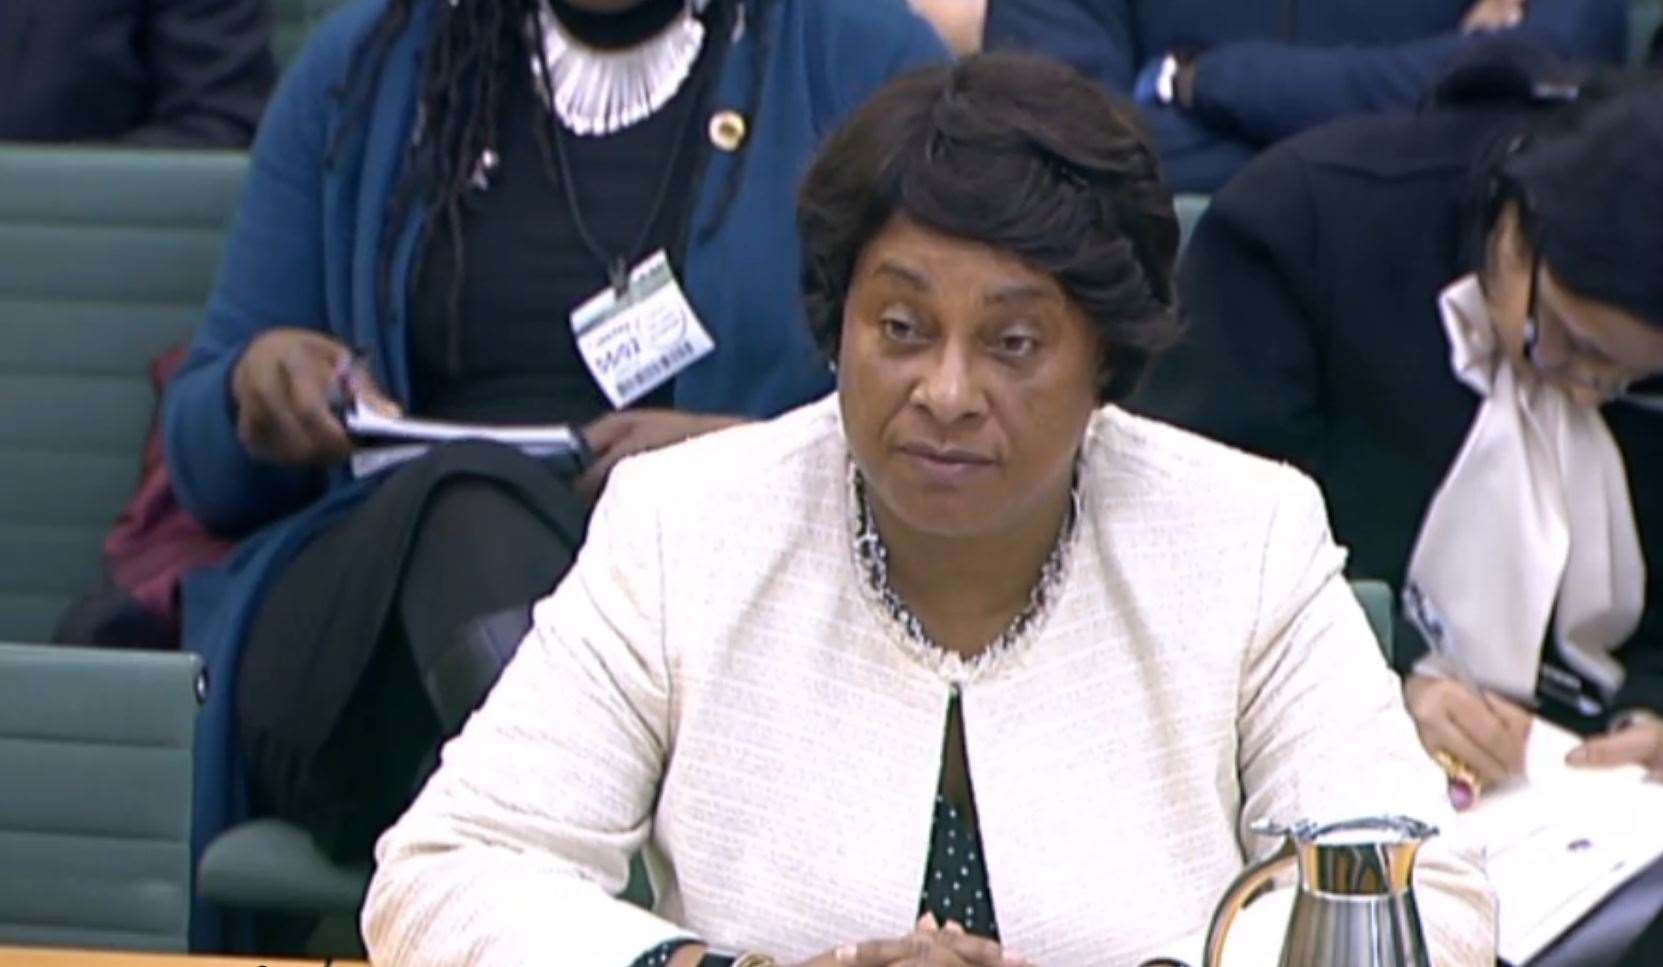 Baroness Doreen Lawrence said discrimination is “clearly rampant” in the ranks of the Met Police (House of Commons/PA)